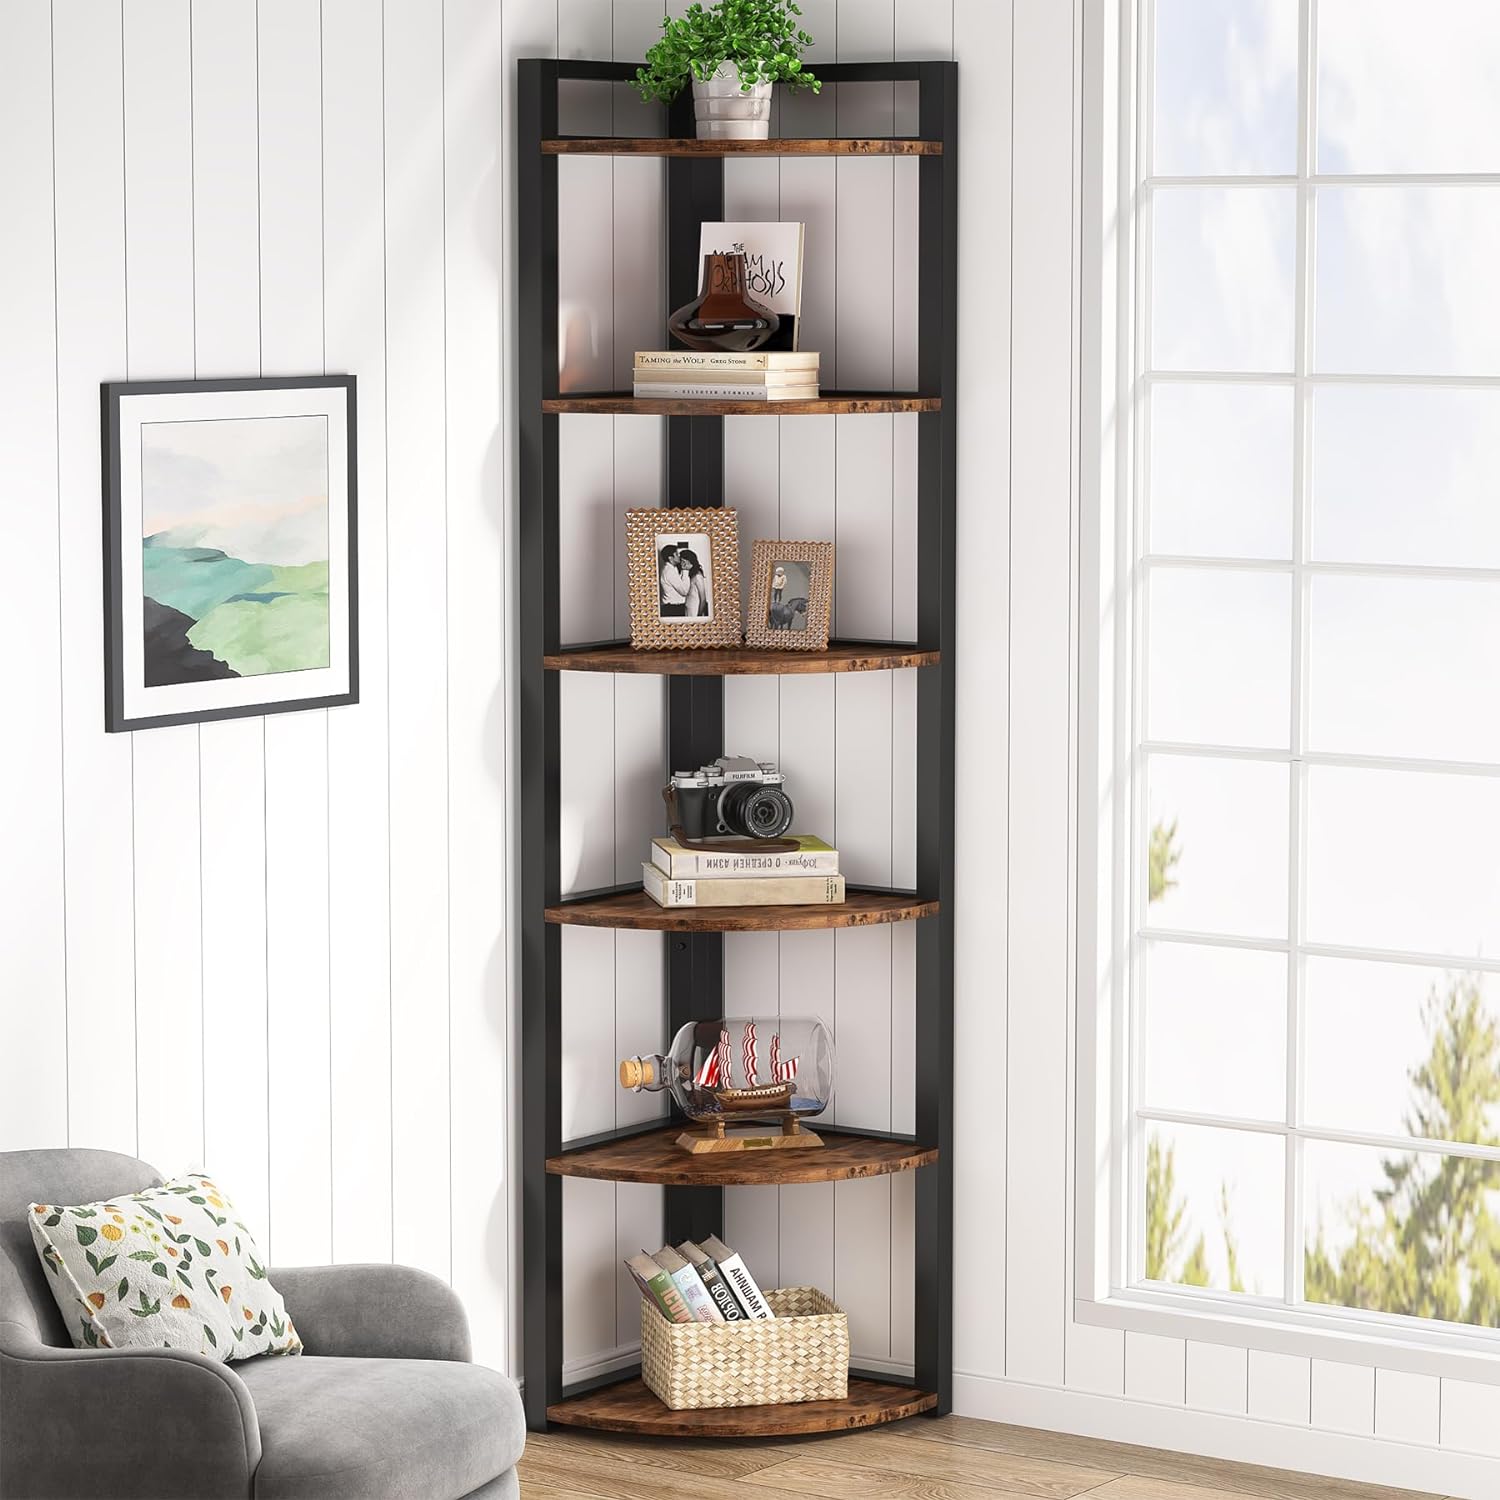 TribeSigns 6 Tier Bookshelf, 70.9 Inch Tall Corner Shelving Unit Storage Rack for Living Room, Home Office, Kitchen, Small Space